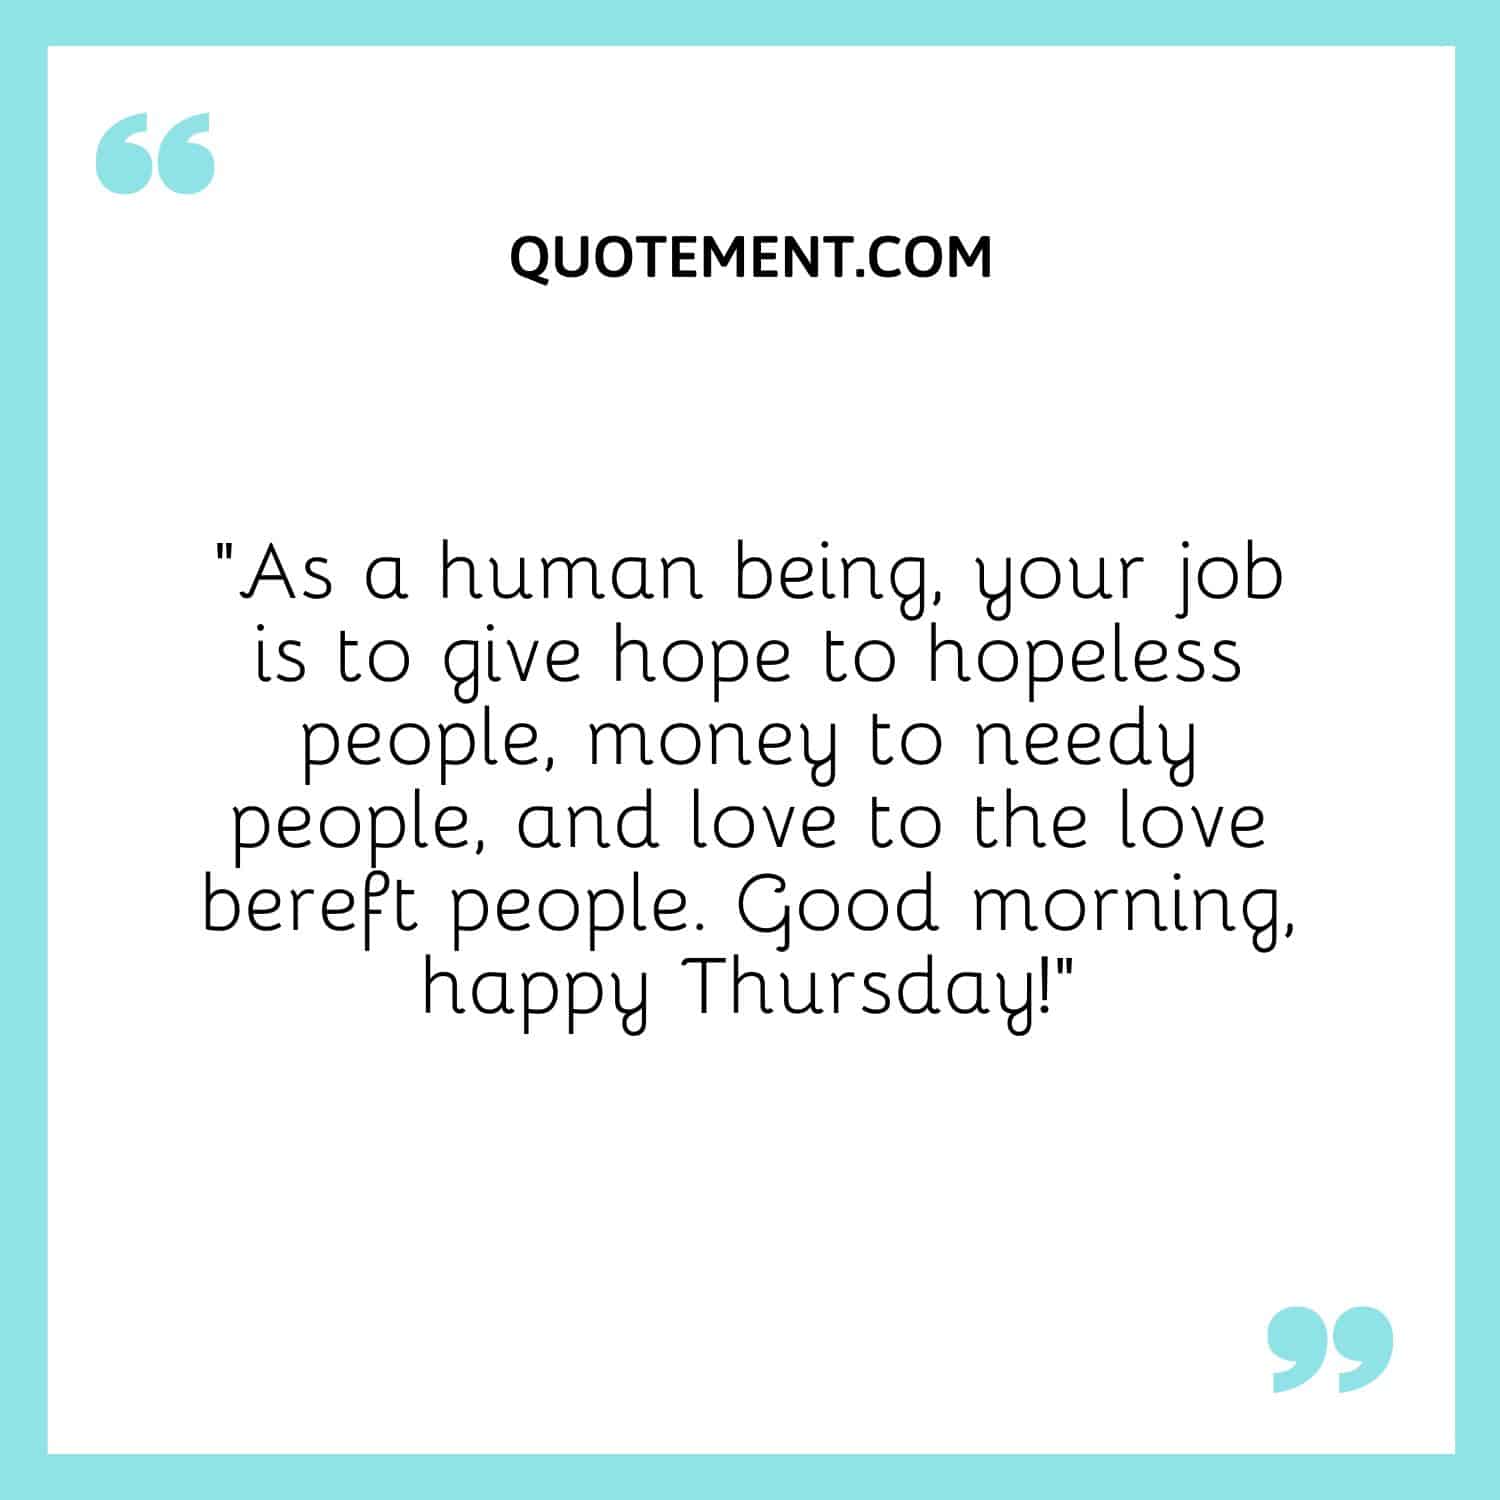 “As a human being, your job is to give hope to hopeless people, money to needy people, and love to the love bereft people. Good morning, happy Thursday!”